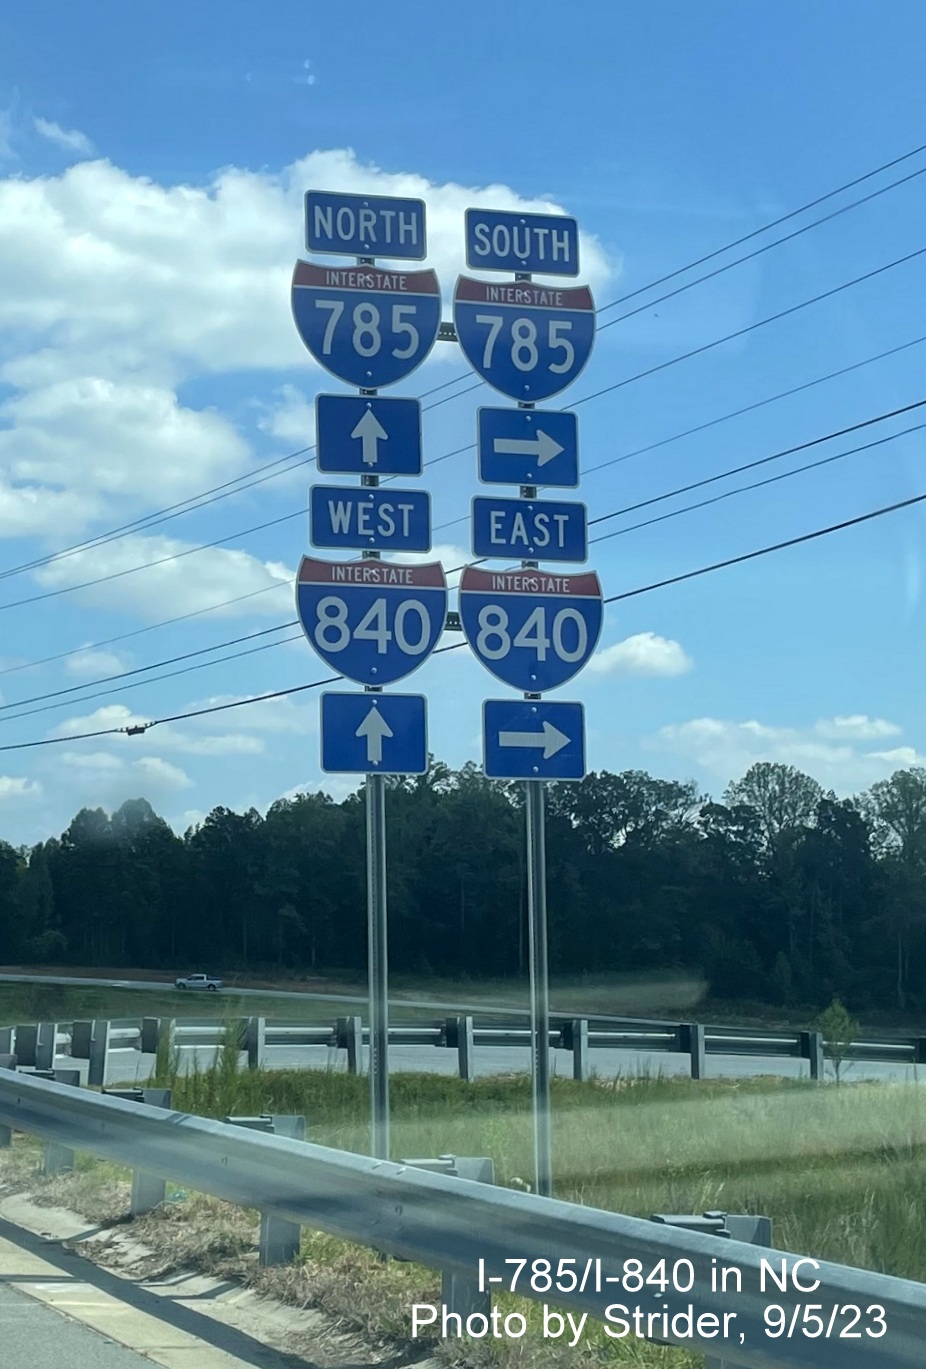 Image of trailblazers at ramp from Huffine Mill Road to Greensboro Urban Loop with recent addition of I-840 shields to existing I-785 shields, by Strider, September 2023